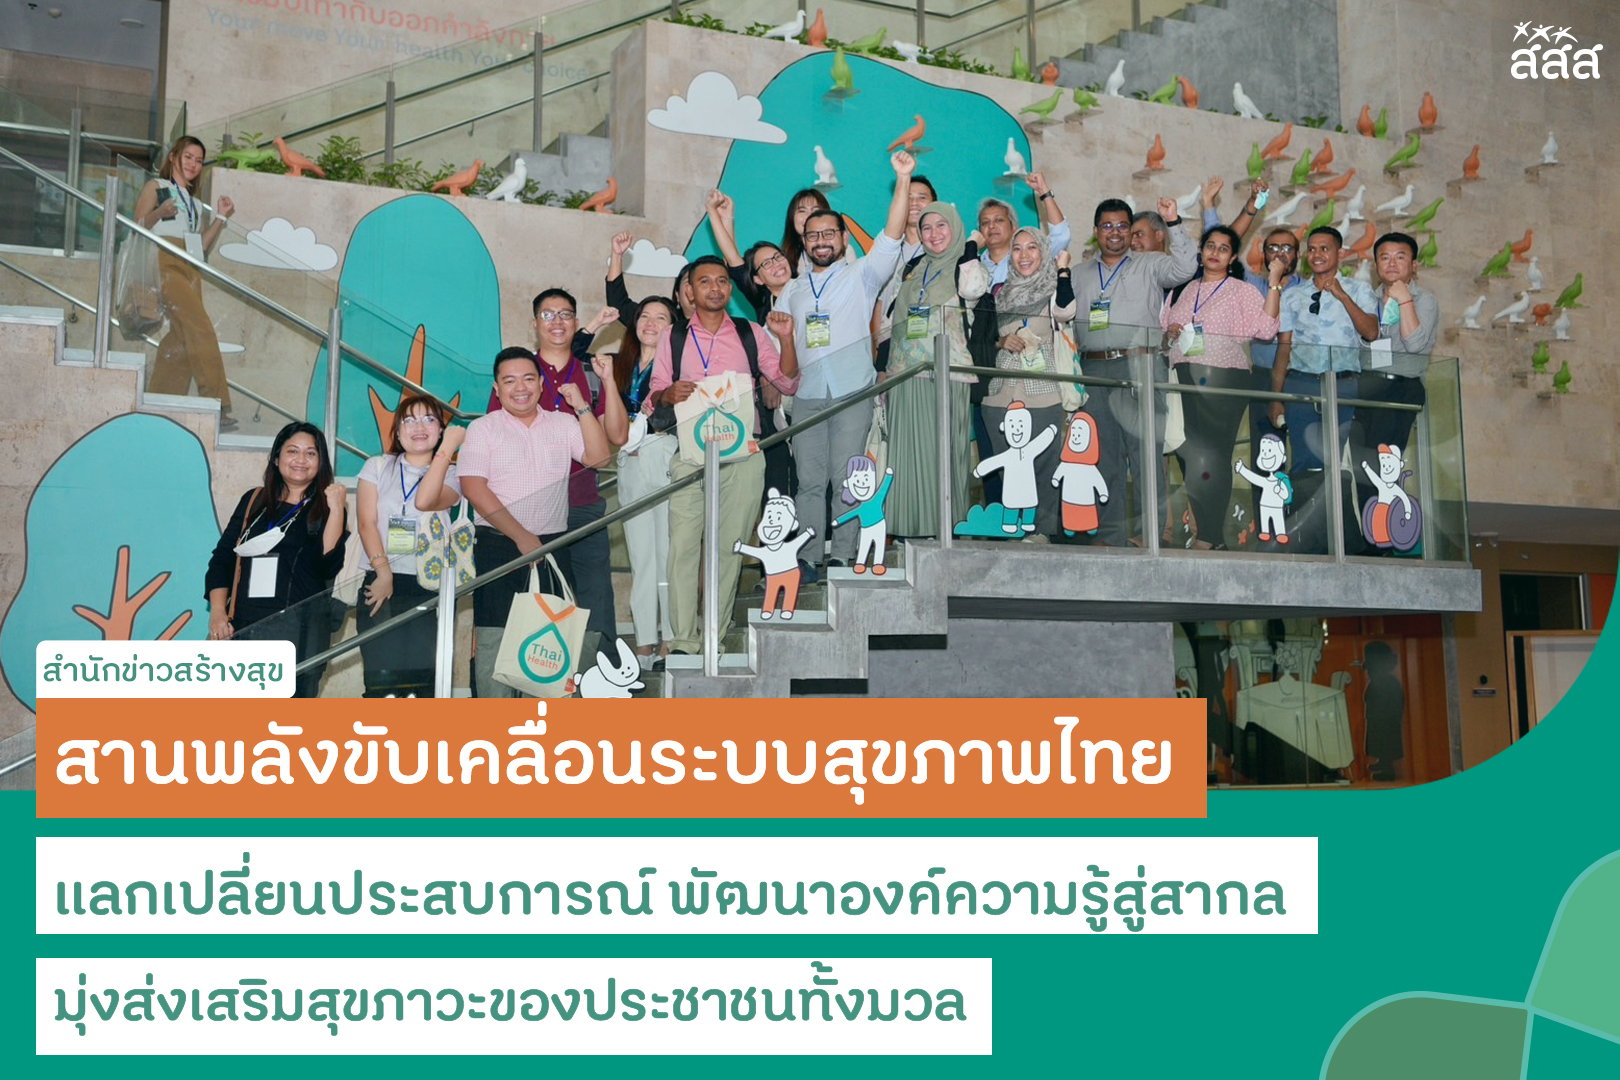 ThaiHealth co-organises Health in All Policyworkshop to develop health-related knowledge base thaihealth